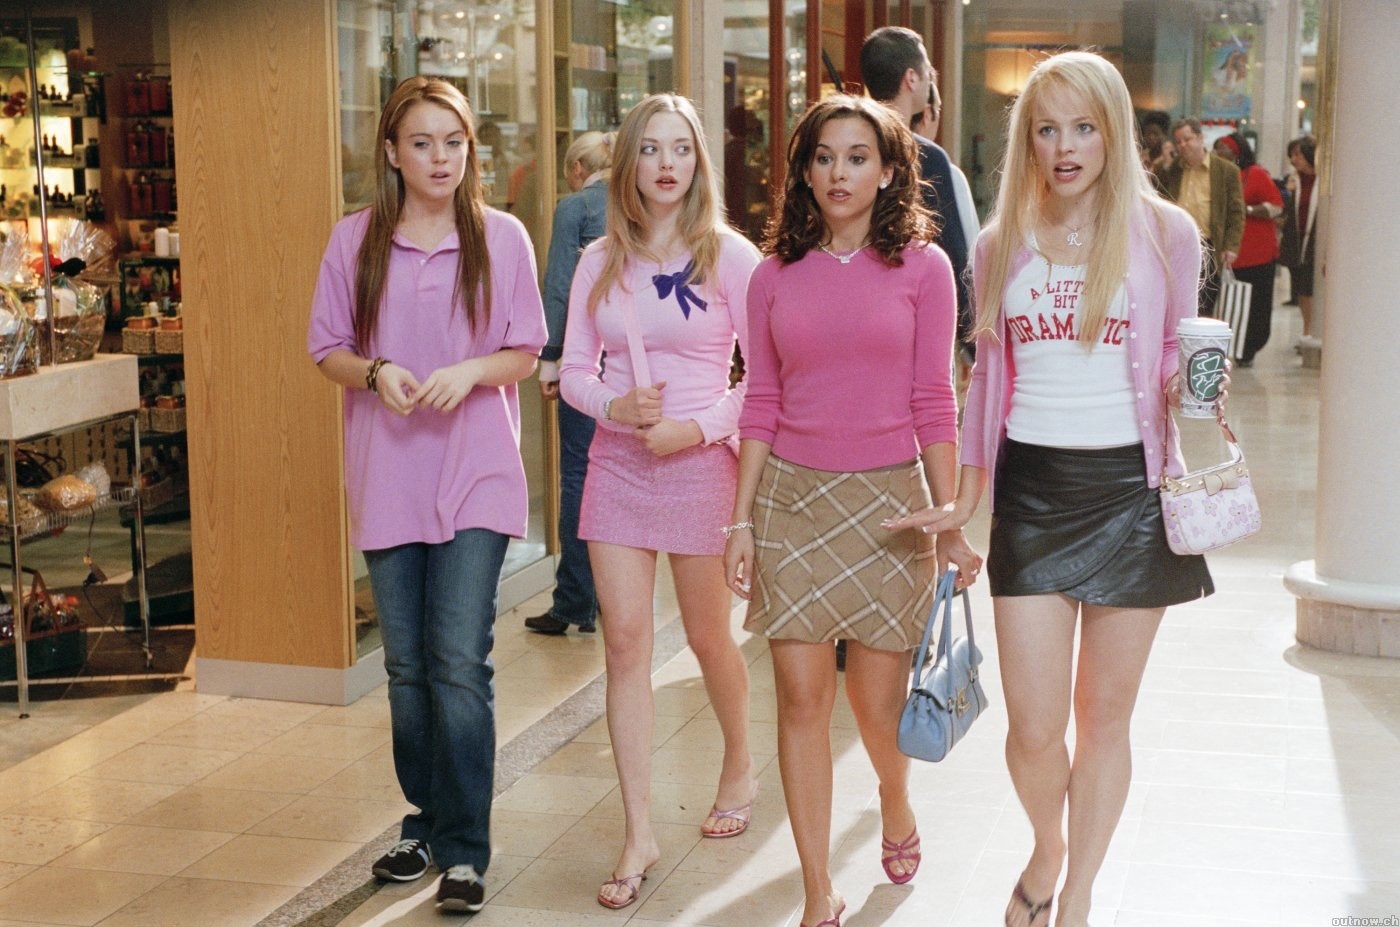 she&#x27;s wearing an oversized pink polo as she walks with the mean girls in the mall